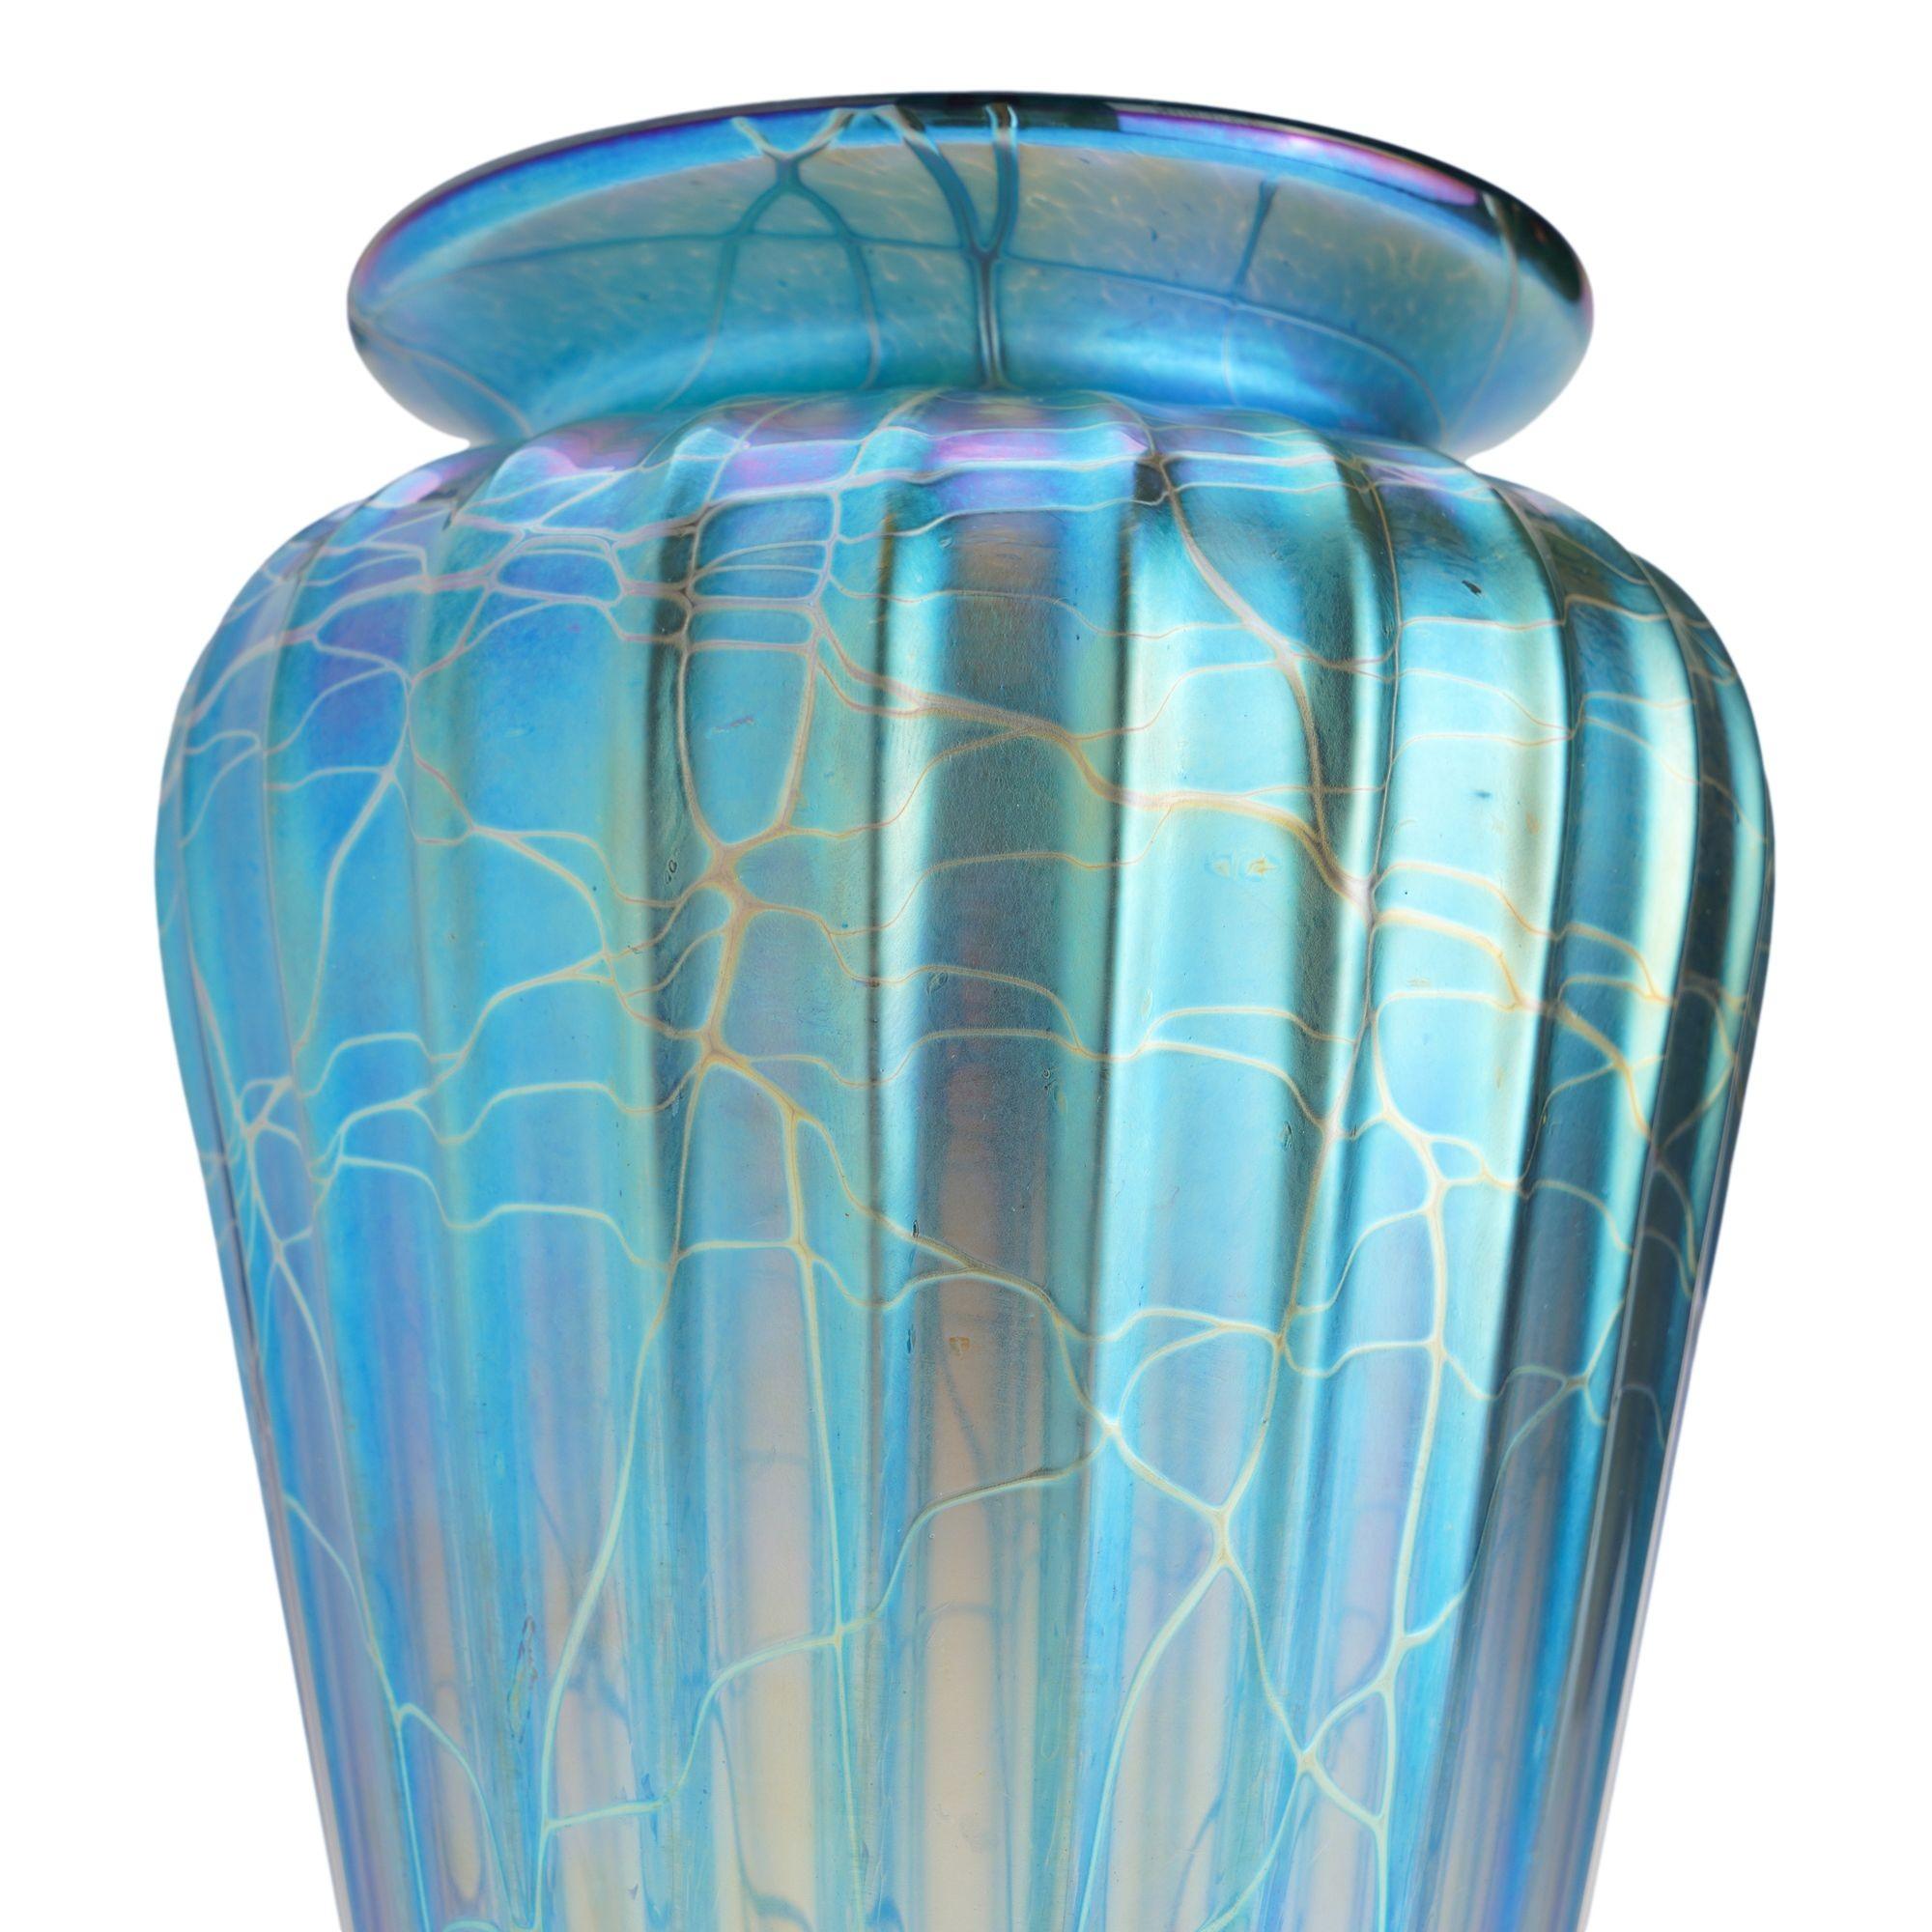 Contemporary iridescent blue blown glass vase by Mayauel Ward, 2015 For Sale 4